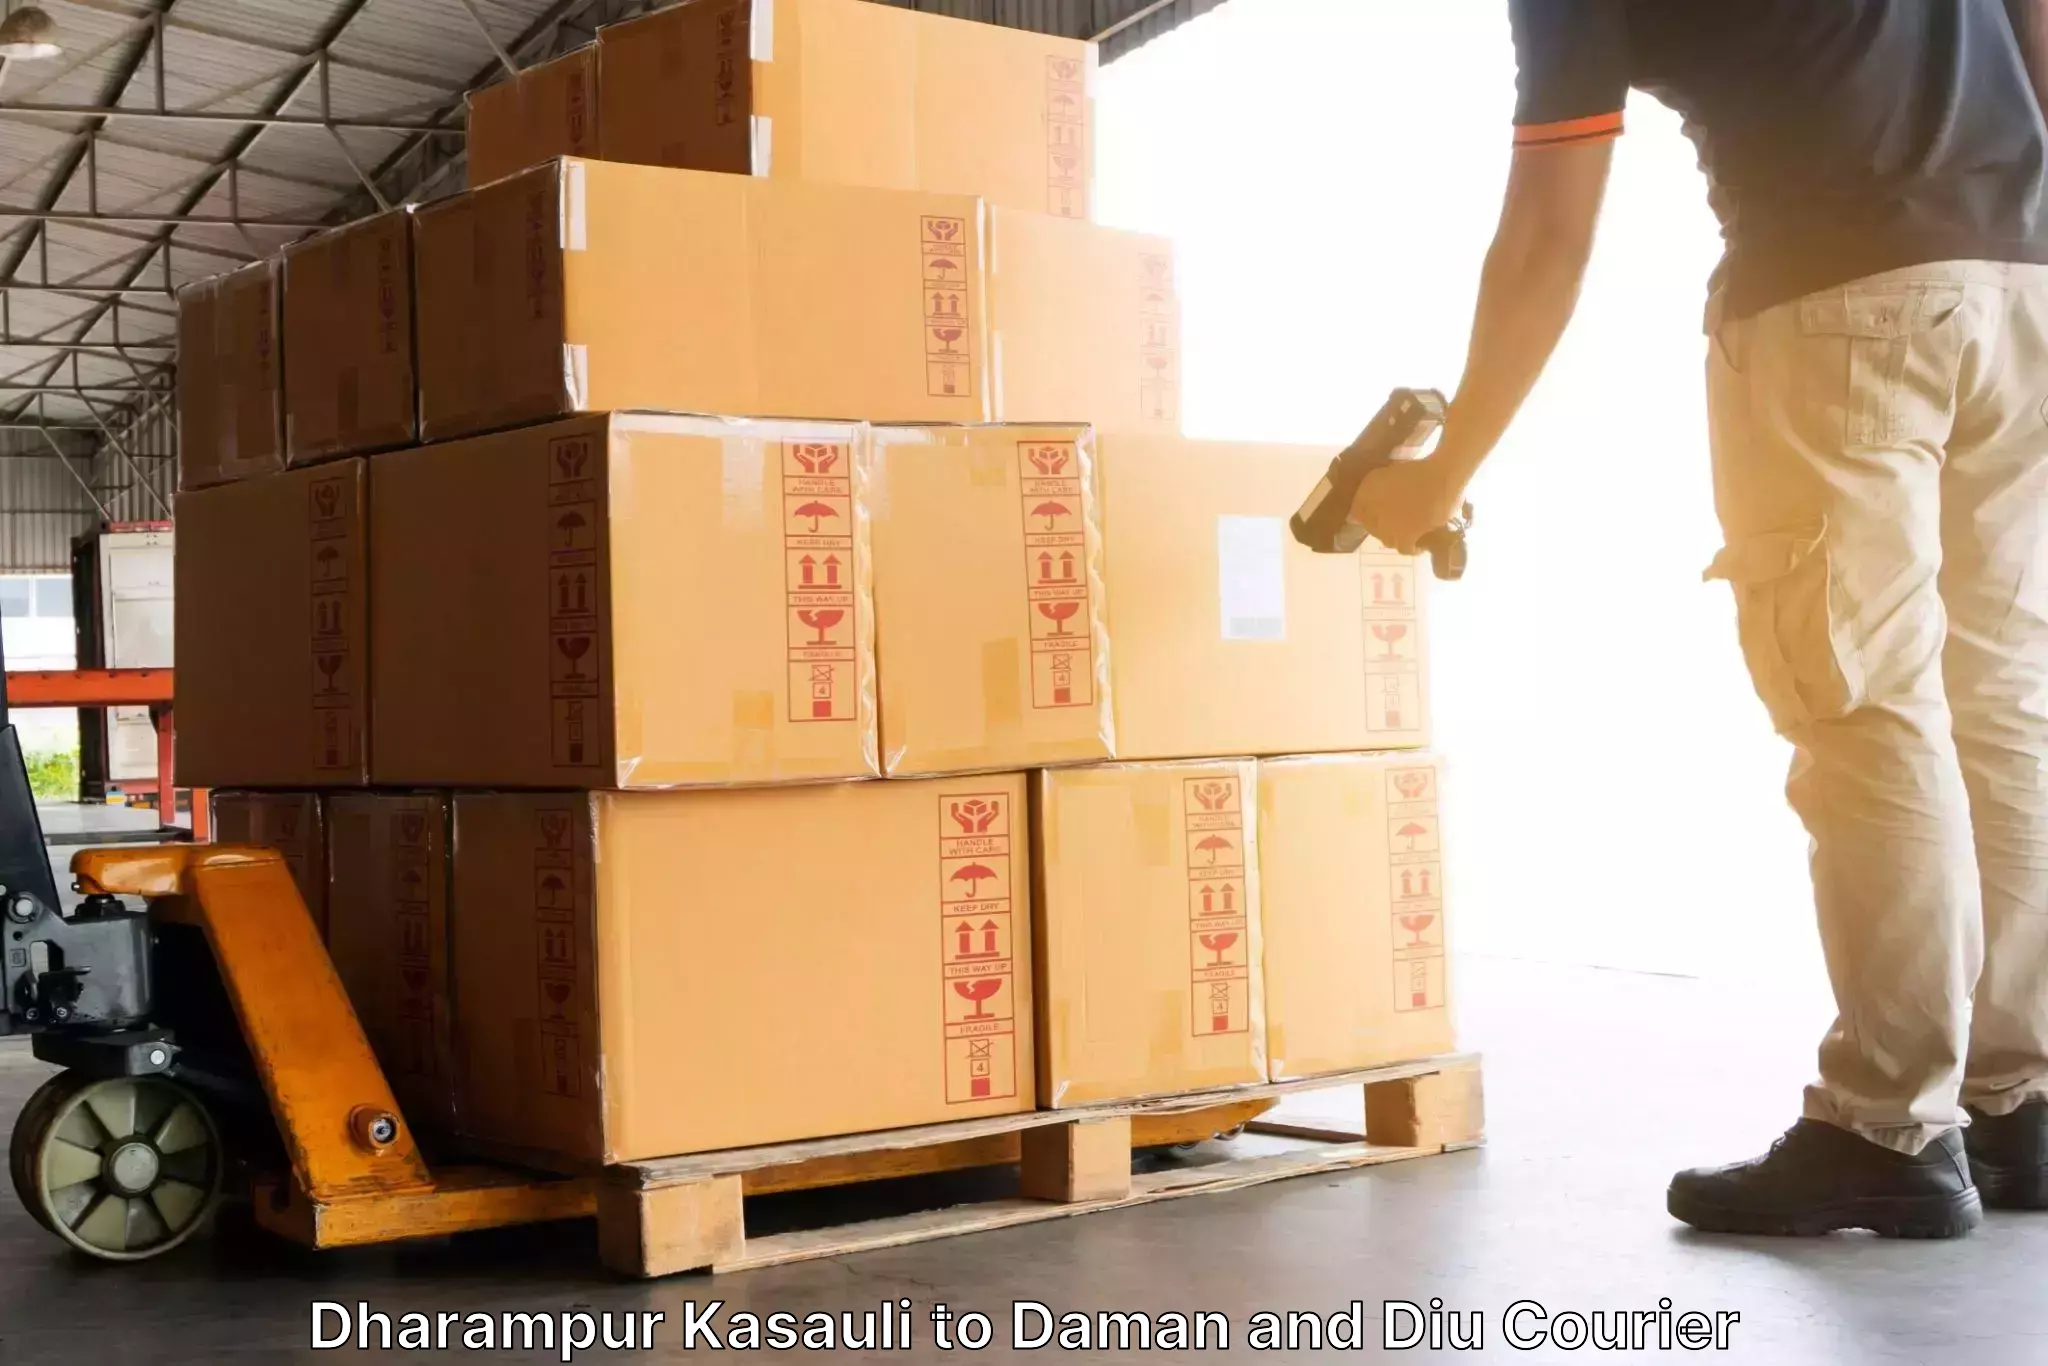 24-hour courier service Dharampur Kasauli to Diu